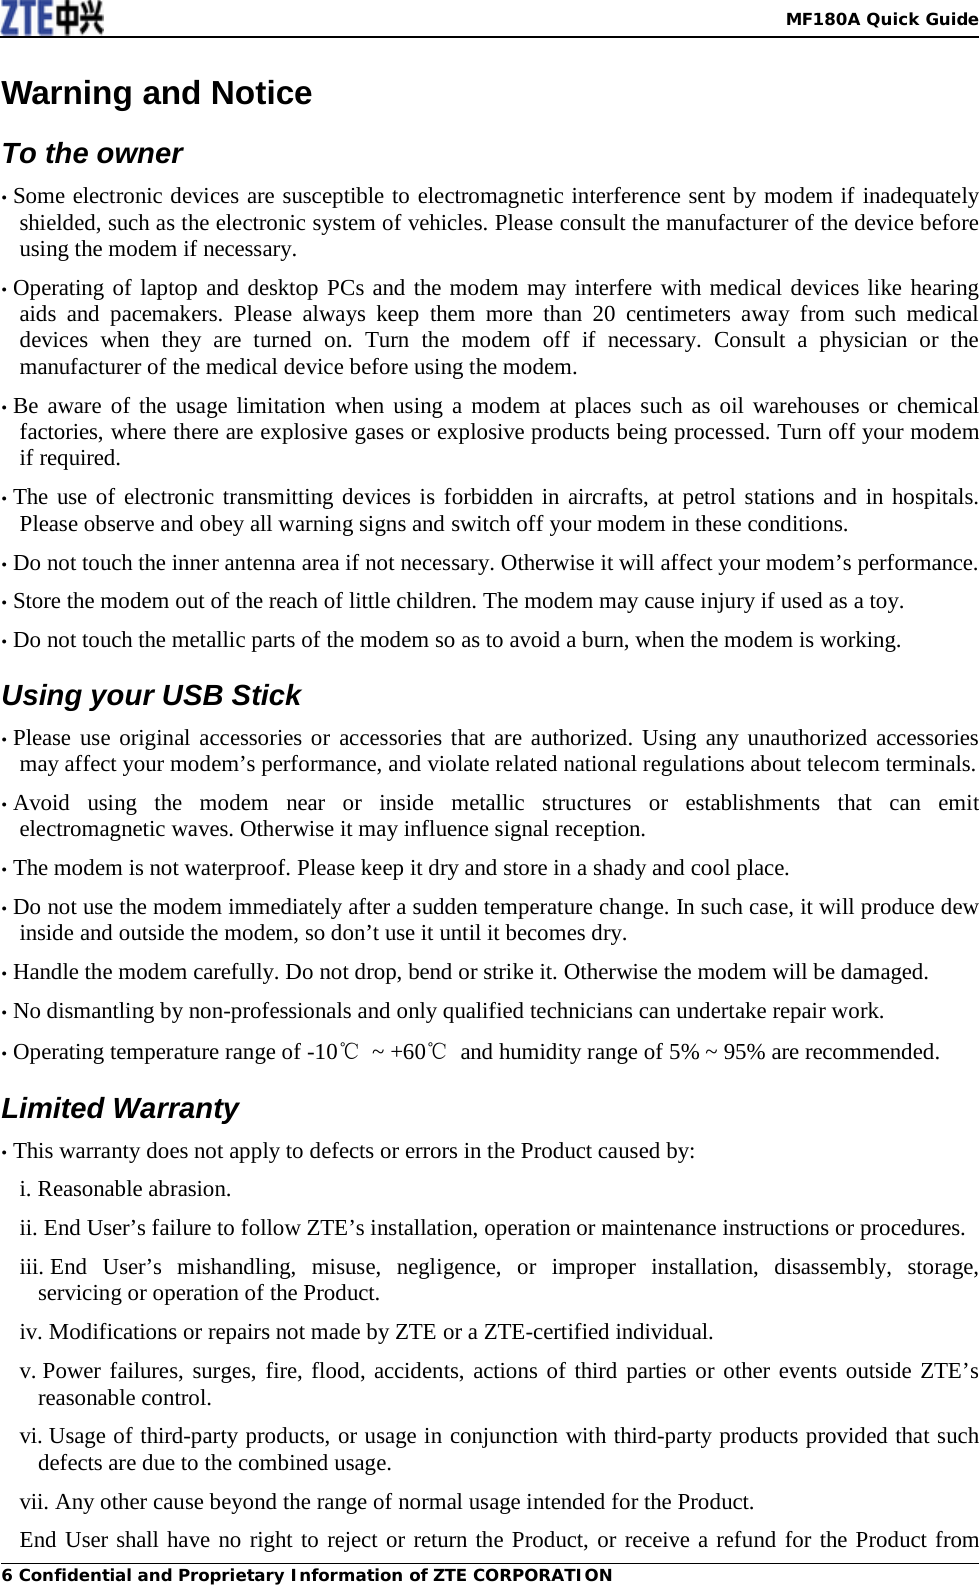   MF180A Quick Guide 6 Confidential and Proprietary Information of ZTE CORPORATION Warning and Notice To the owner • Some electronic devices are susceptible to electromagnetic interference sent by modem if inadequately shielded, such as the electronic system of vehicles. Please consult the manufacturer of the device before using the modem if necessary. • Operating of laptop and desktop PCs and the modem may interfere with medical devices like hearing aids and pacemakers. Please always keep them more than 20 centimeters away from such medical devices when they are turned on. Turn the modem off if necessary. Consult a physician or the manufacturer of the medical device before using the modem. • Be aware of the usage limitation when using a modem at places such as oil warehouses or chemical factories, where there are explosive gases or explosive products being processed. Turn off your modem if required. • The use of electronic transmitting devices is forbidden in aircrafts, at petrol stations and in hospitals. Please observe and obey all warning signs and switch off your modem in these conditions. • Do not touch the inner antenna area if not necessary. Otherwise it will affect your modem’s performance. • Store the modem out of the reach of little children. The modem may cause injury if used as a toy. • Do not touch the metallic parts of the modem so as to avoid a burn, when the modem is working. Using your USB Stick • Please use original accessories or accessories that are authorized. Using any unauthorized accessories may affect your modem’s performance, and violate related national regulations about telecom terminals. • Avoid using the modem near or inside metallic structures or establishments that can emit electromagnetic waves. Otherwise it may influence signal reception. • The modem is not waterproof. Please keep it dry and store in a shady and cool place. • Do not use the modem immediately after a sudden temperature change. In such case, it will produce dew inside and outside the modem, so don’t use it until it becomes dry. • Handle the modem carefully. Do not drop, bend or strike it. Otherwise the modem will be damaged. • No dismantling by non-professionals and only qualified technicians can undertake repair work. • Operating temperature range of -10℃ ~ +60℃ and humidity range of 5% ~ 95% are recommended. Limited Warranty • This warranty does not apply to defects or errors in the Product caused by: i. Reasonable abrasion. ii. End User’s failure to follow ZTE’s installation, operation or maintenance instructions or procedures. iii. End User’s mishandling, misuse, negligence, or improper installation, disassembly, storage, servicing or operation of the Product. iv. Modifications or repairs not made by ZTE or a ZTE-certified individual. v. Power failures, surges, fire, flood, accidents, actions of third parties or other events outside ZTE’s reasonable control. vi. Usage of third-party products, or usage in conjunction with third-party products provided that such defects are due to the combined usage. vii. Any other cause beyond the range of normal usage intended for the Product. End User shall have no right to reject or return the Product, or receive a refund for the Product from 